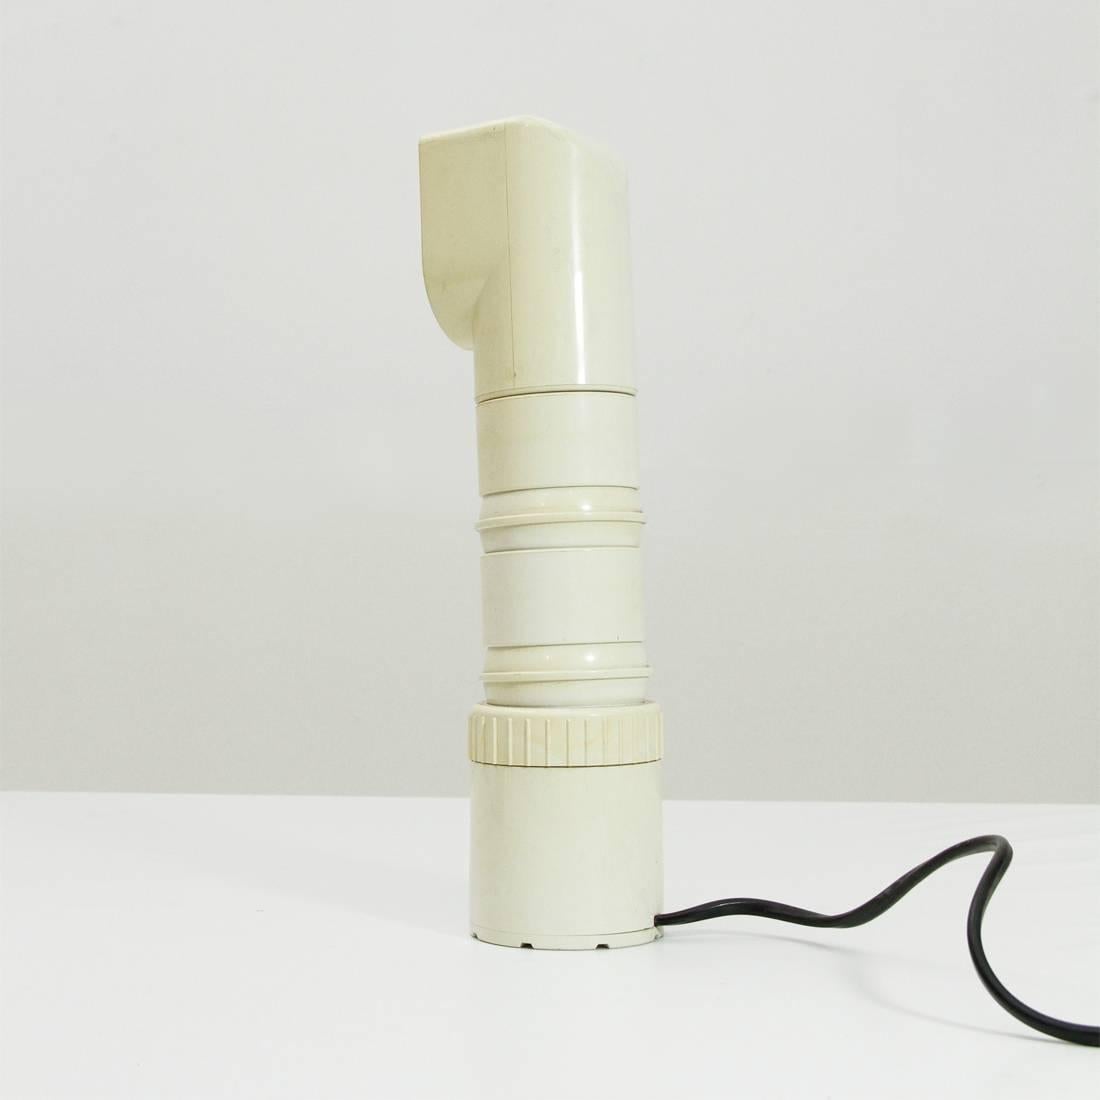 Italian White Table Lamp 4025 by Olaf Von Bohr for Kartell, 1970s For Sale